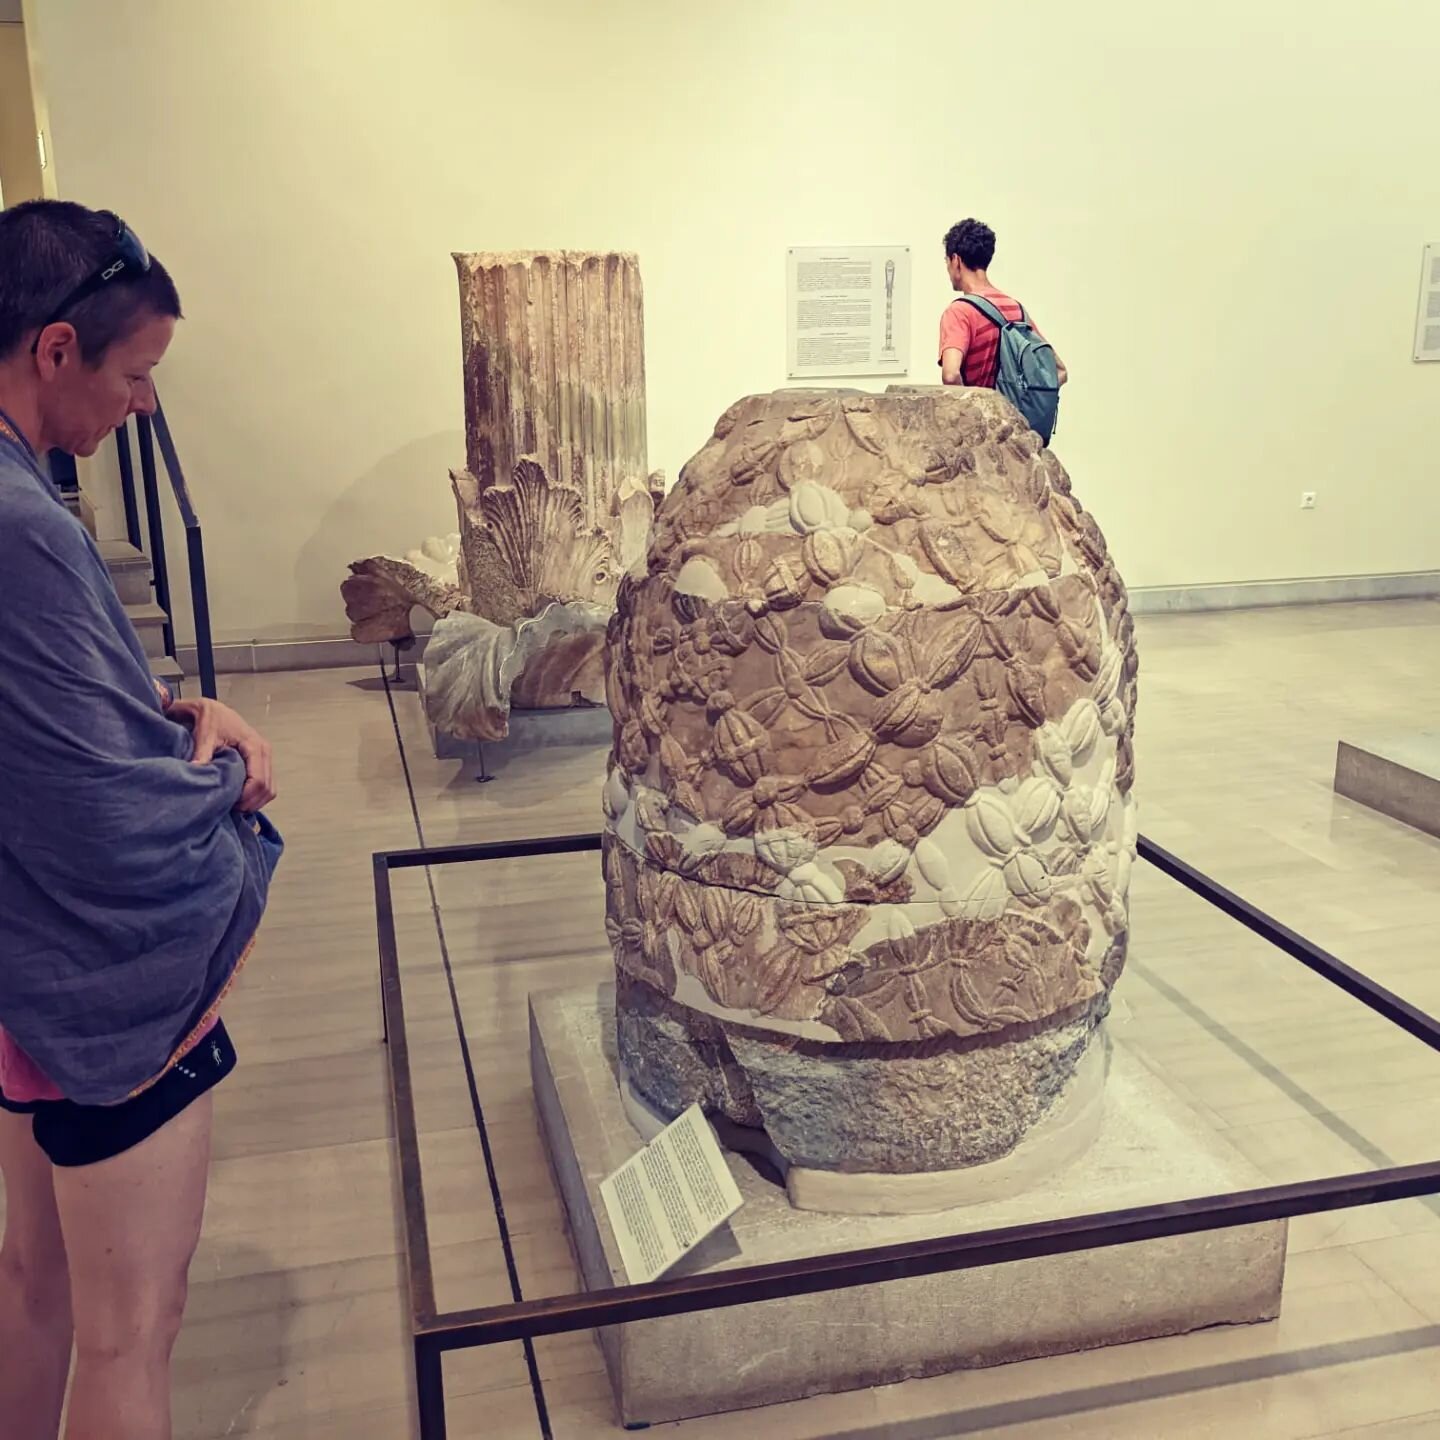 #navelgazing #holidays
A day trip to #delphi, home of the famous oracle. This is the #omphalos or belly button of the world. The patterning is quite something 😊